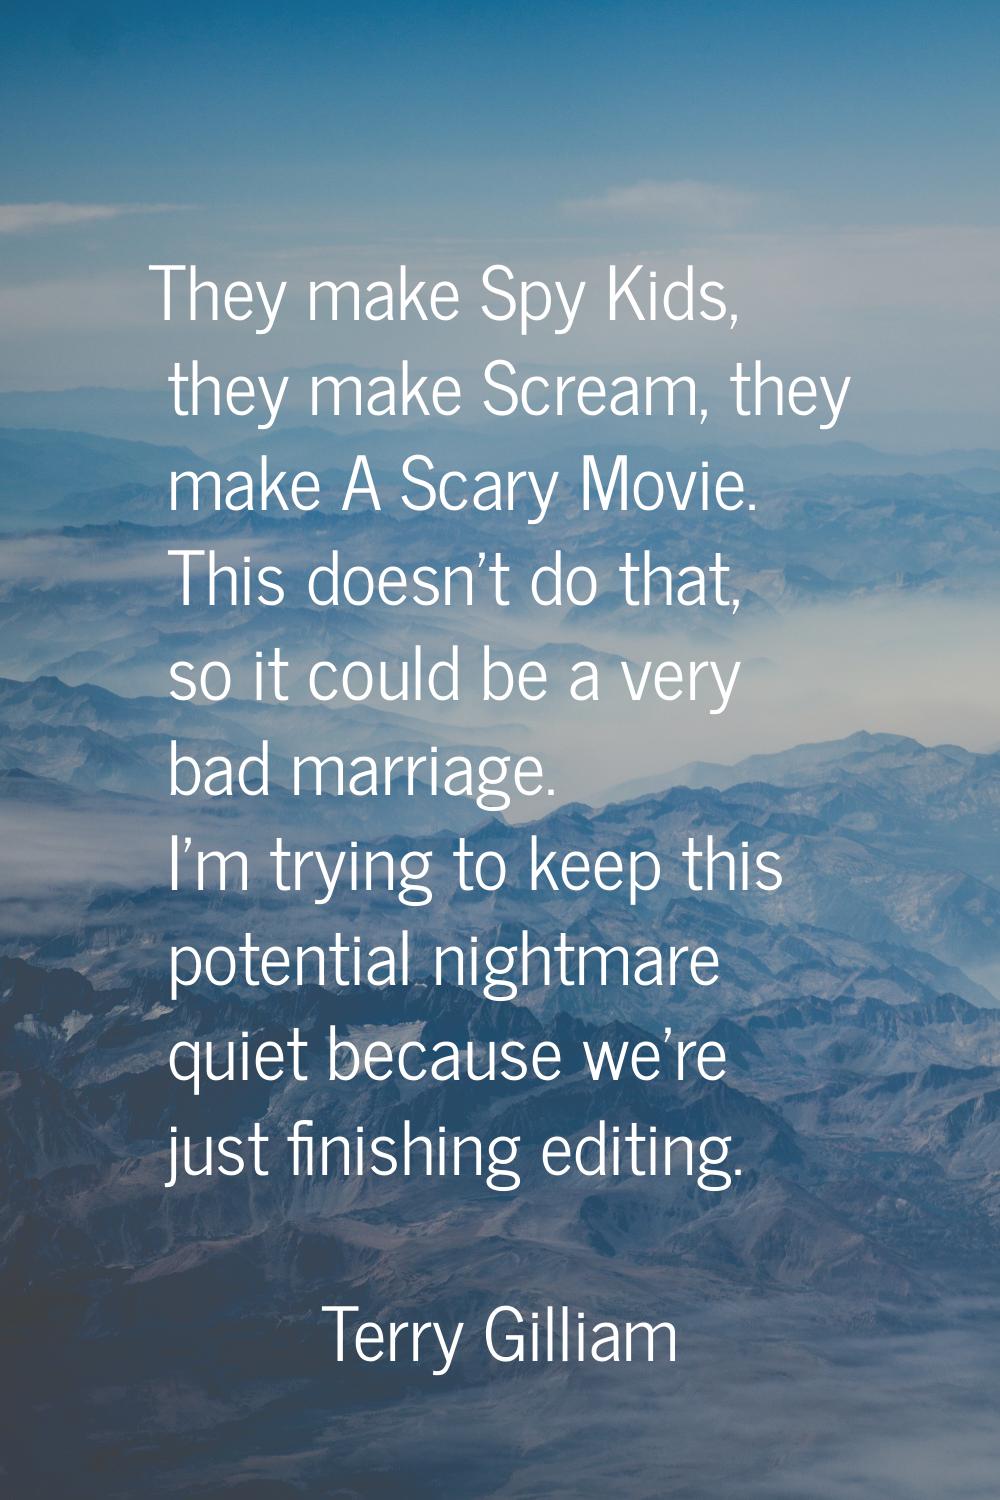 They make Spy Kids, they make Scream, they make A Scary Movie. This doesn't do that, so it could be